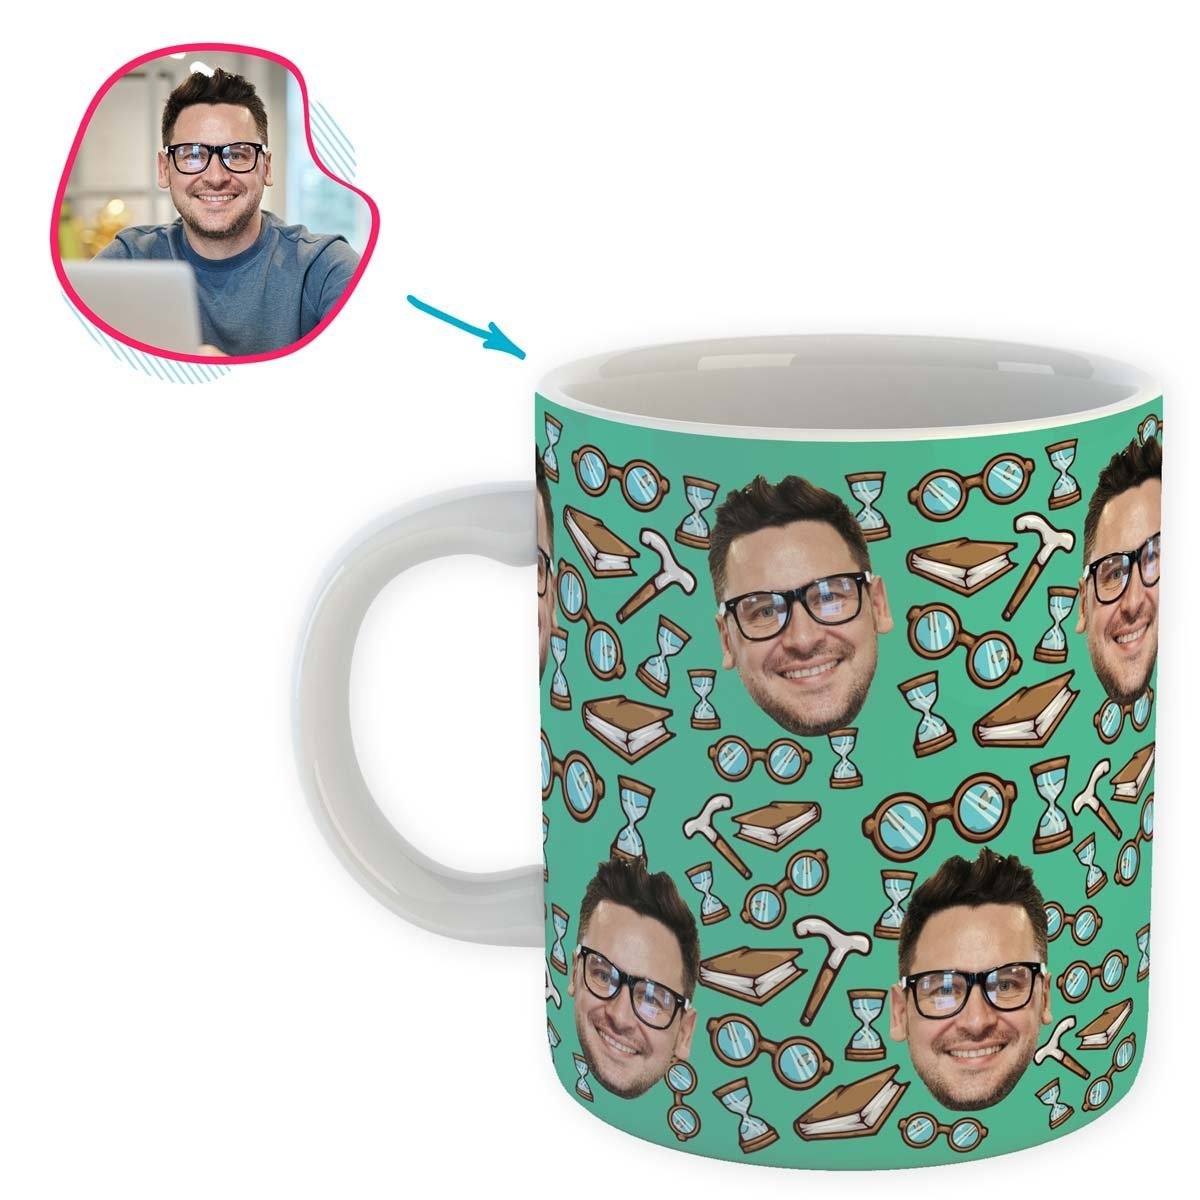 Mint Retirement personalized mug with photo of face printed on it